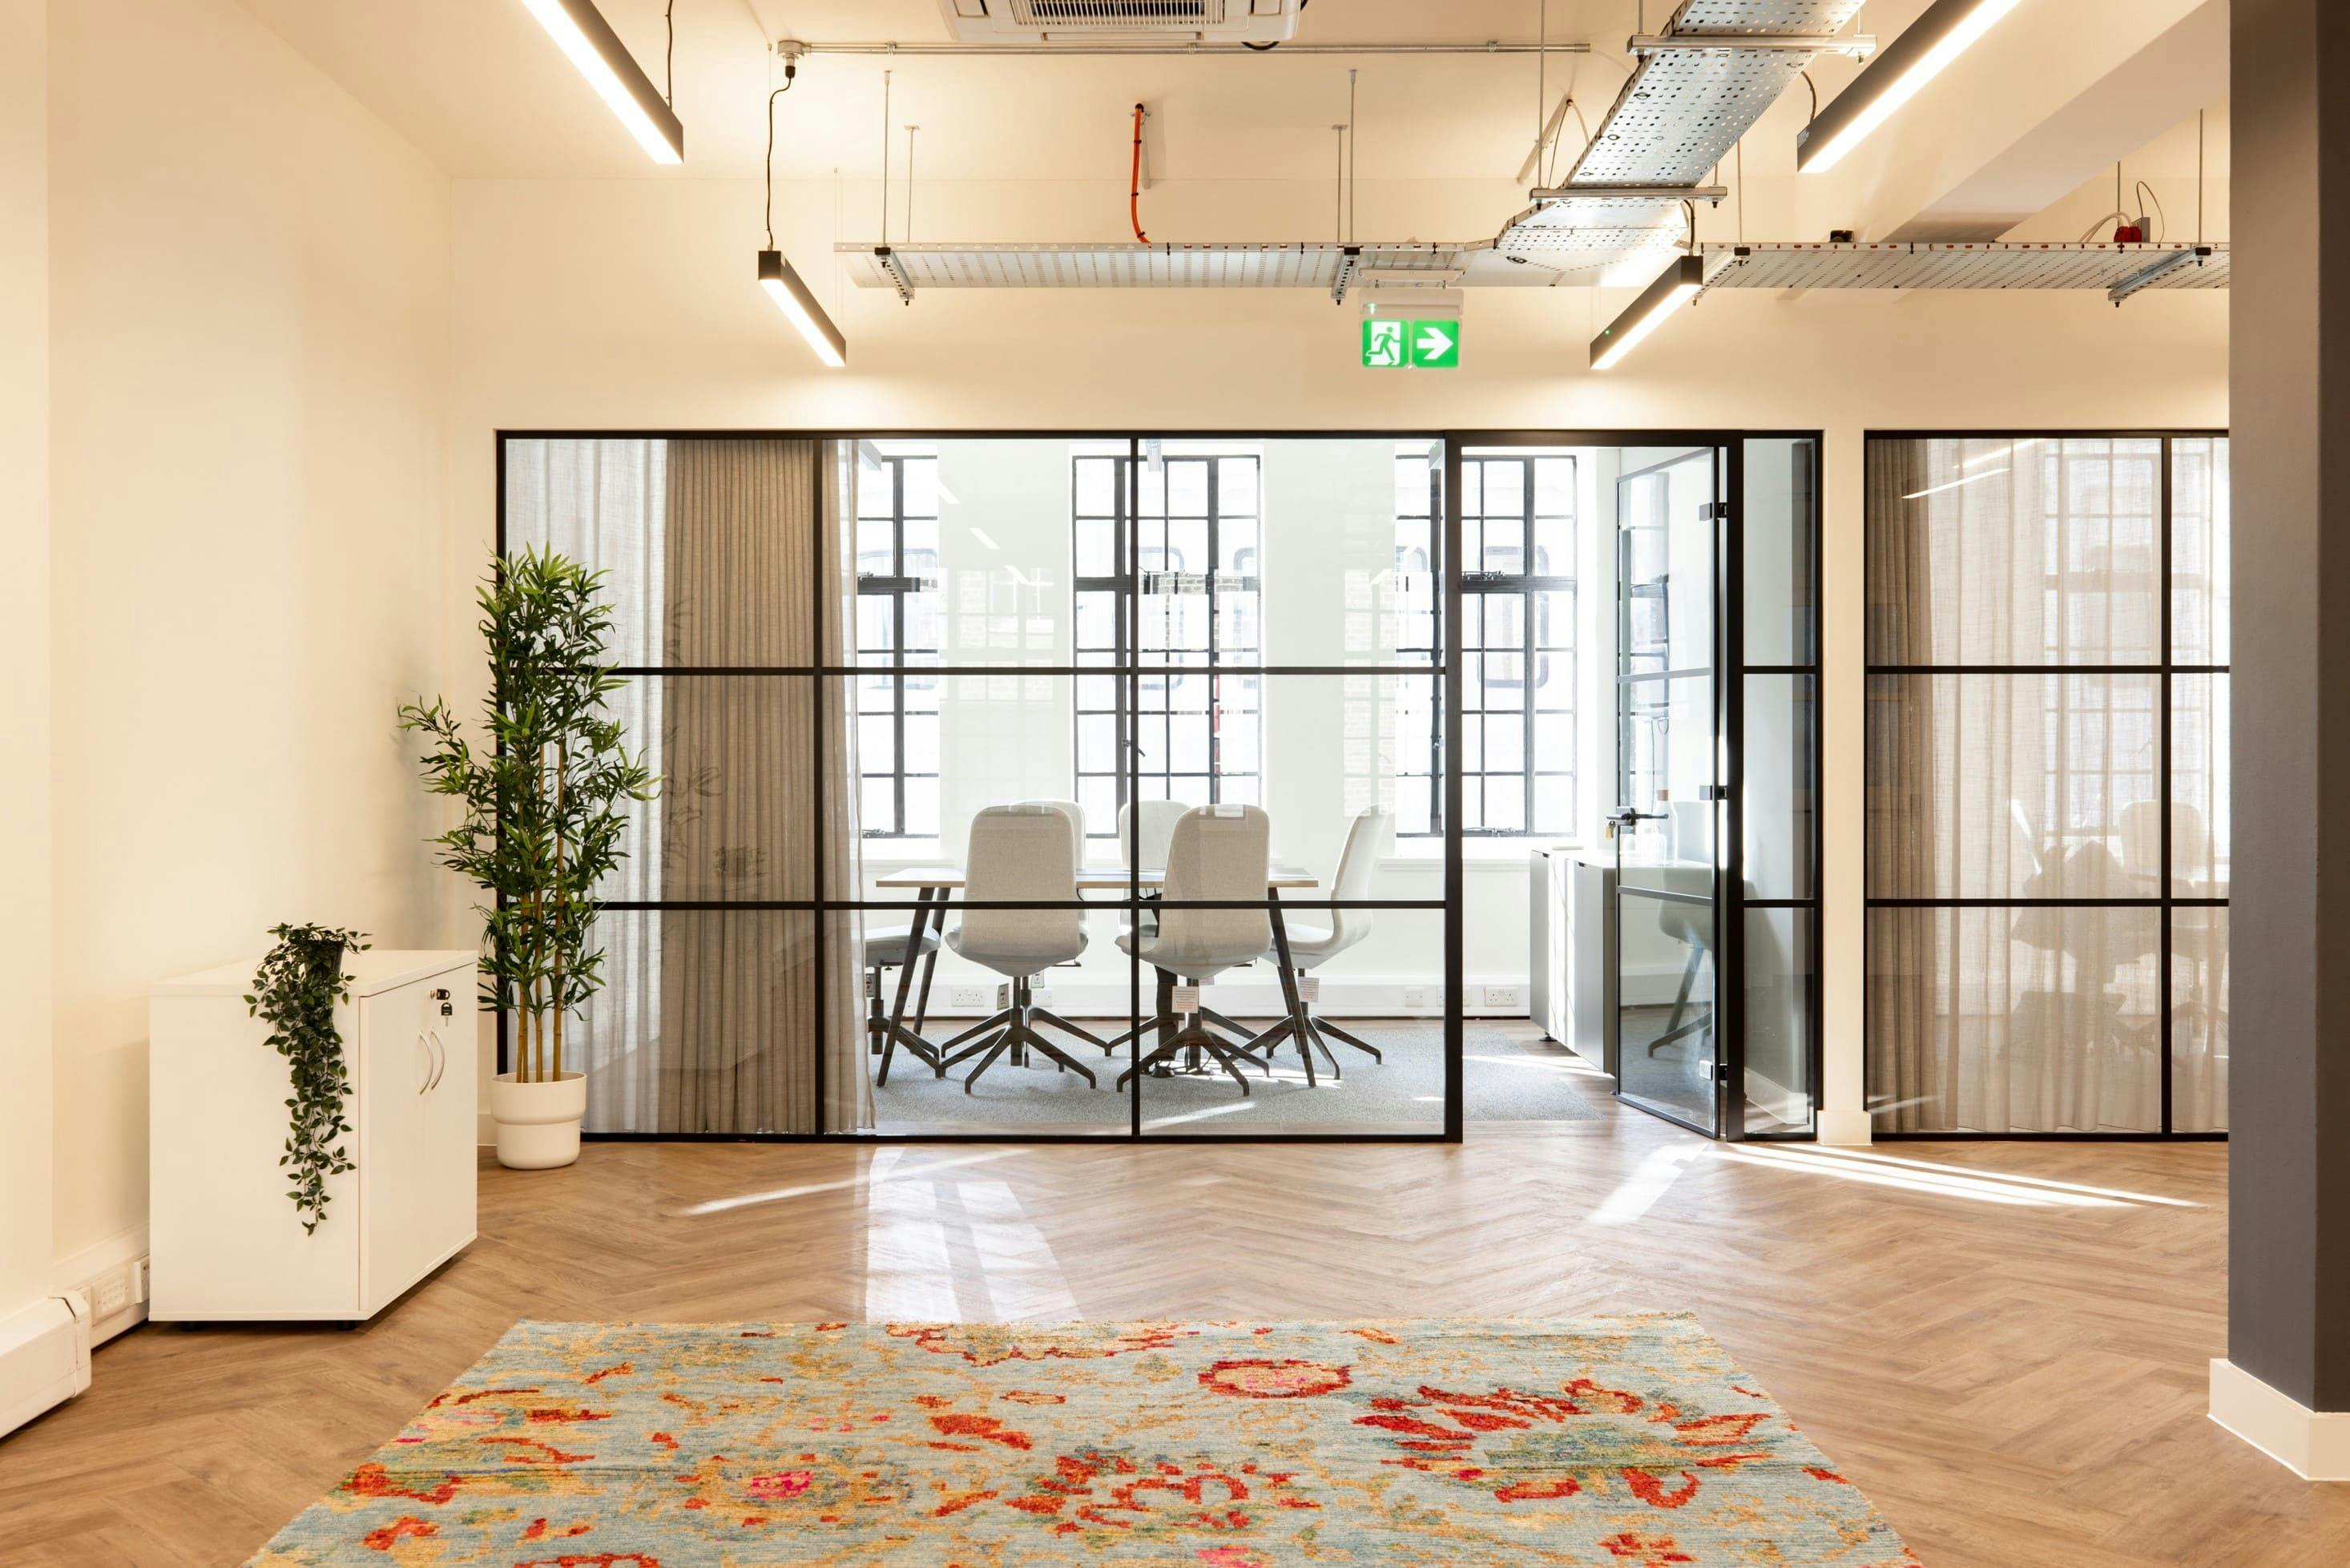 Kings Cross – 60 Person Office - Argyle House